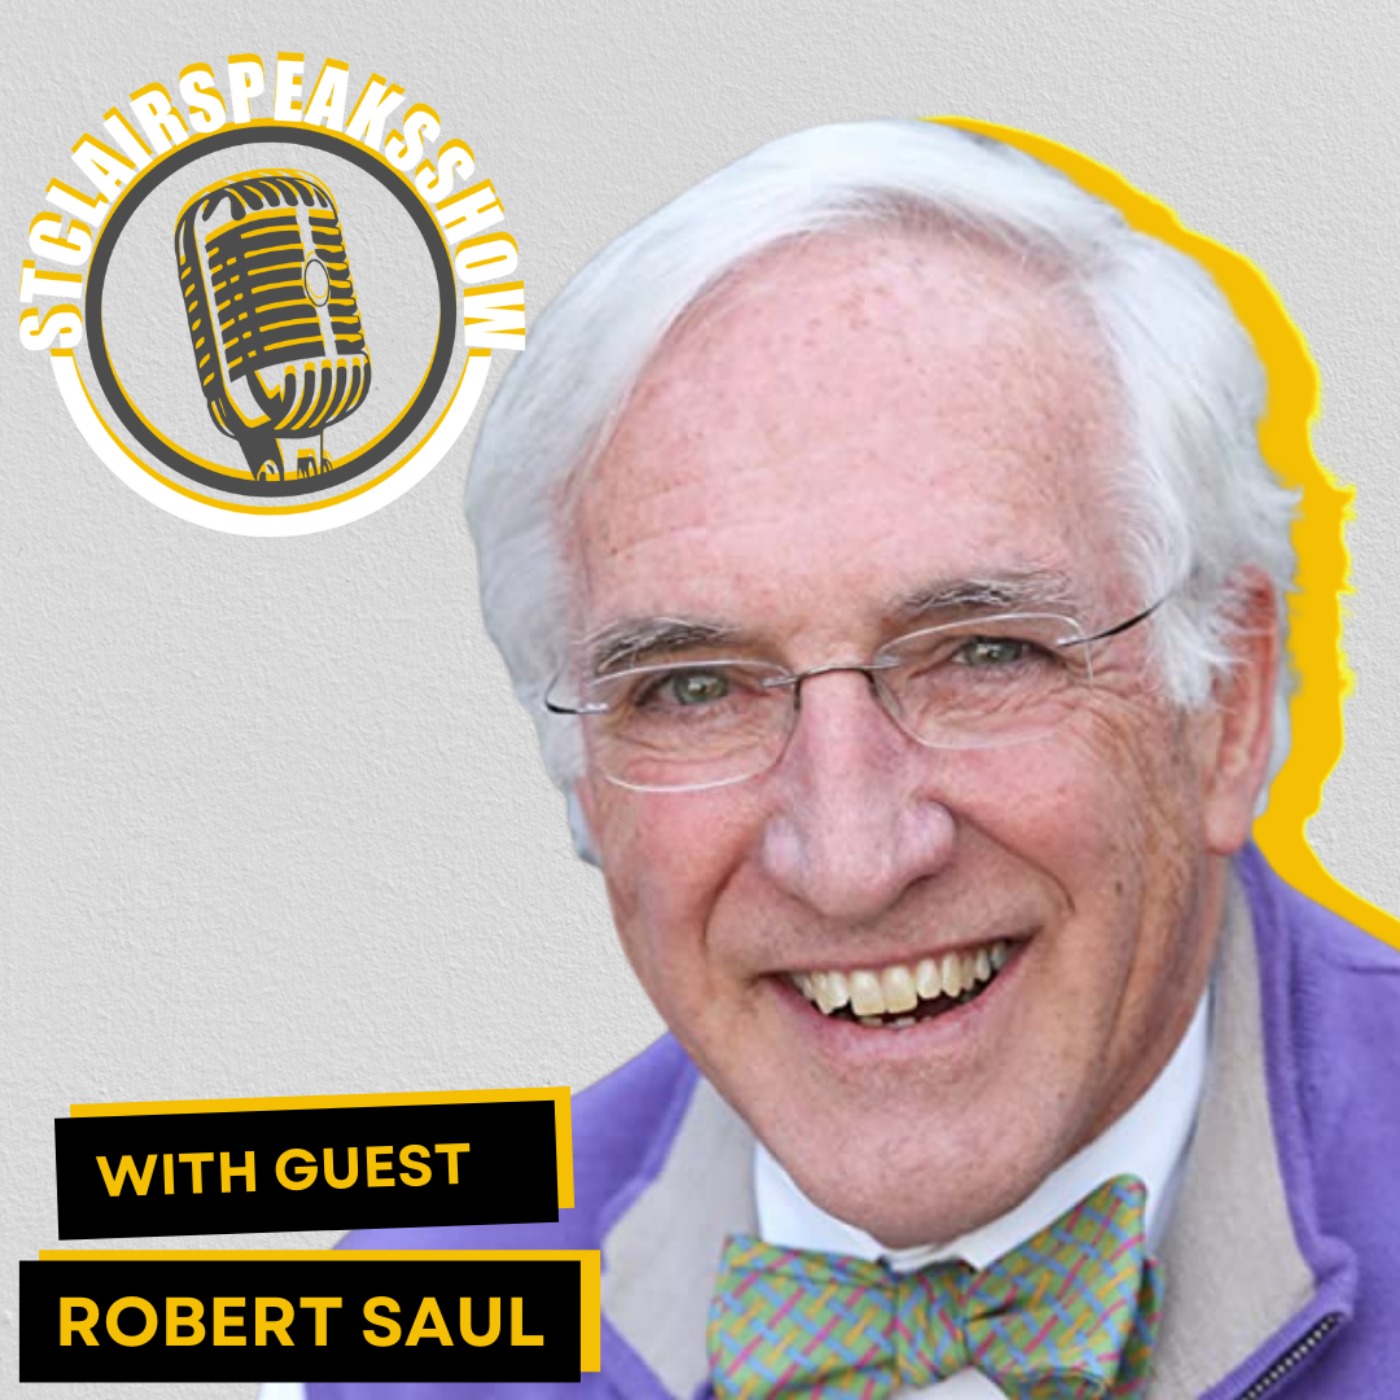 The StclairSpeaksShow Podcast with Robert Saul - Conscious Parenting & Forgiving Yourself